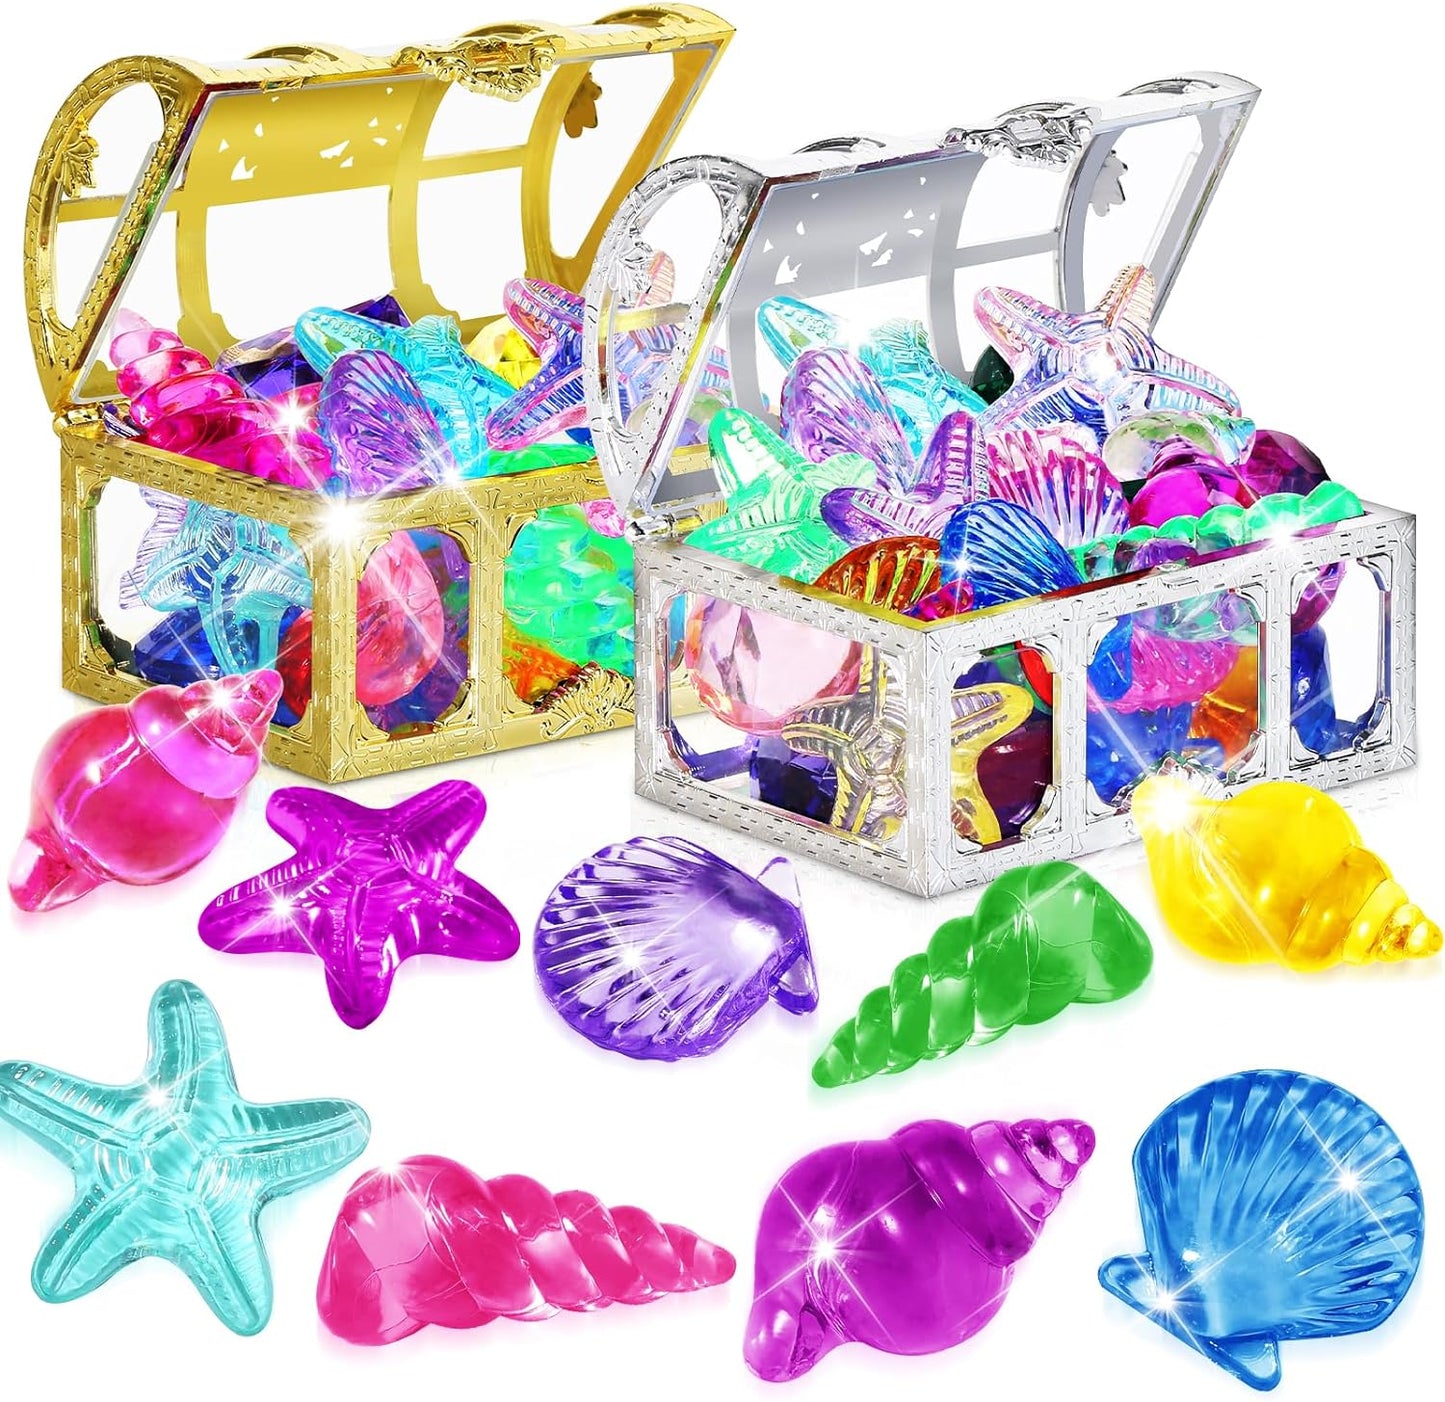 Pool Toys, 36 Pcs Dive Gems Pool Toys for Kids Ages 4-8, 8-12, Summer Throw Pool Toys with Assorted Diving Gems and 2 Treasure Boxes, Summer Beach Toys for Boys and Girls